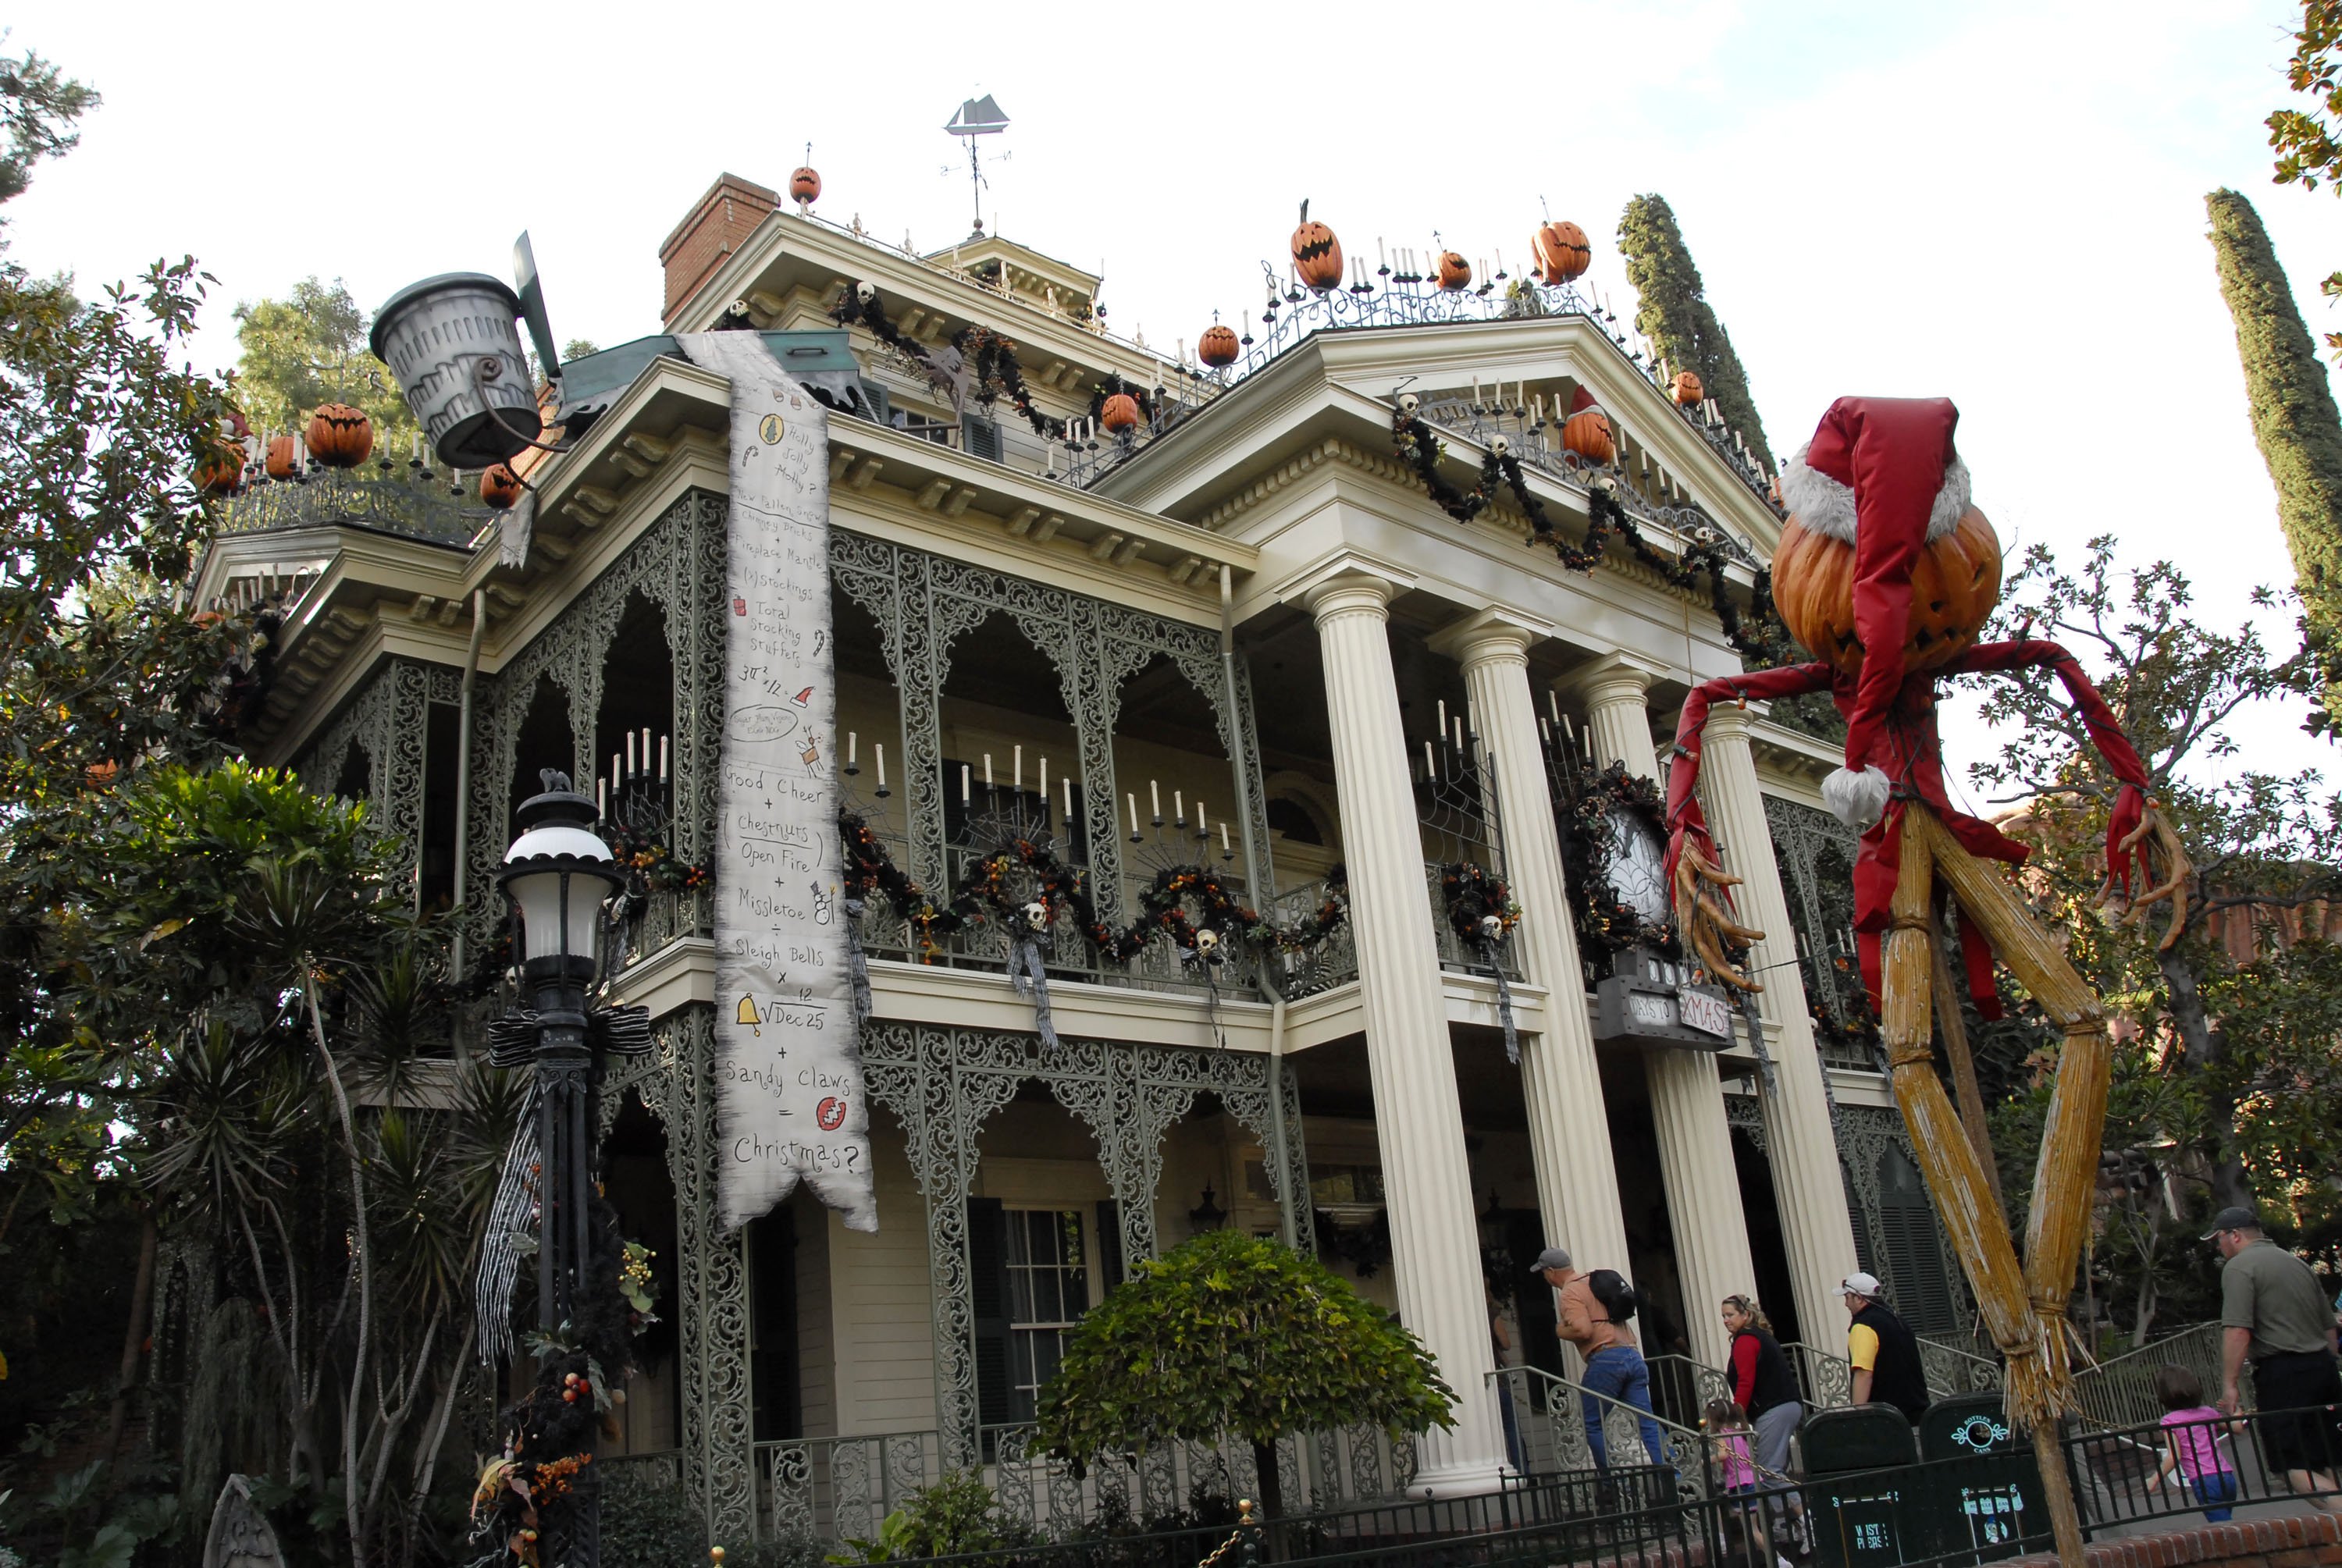 Tim Burton's The Nightmare Before Christmas takes over the Haunted Mansion at Disney Land for the holiday season